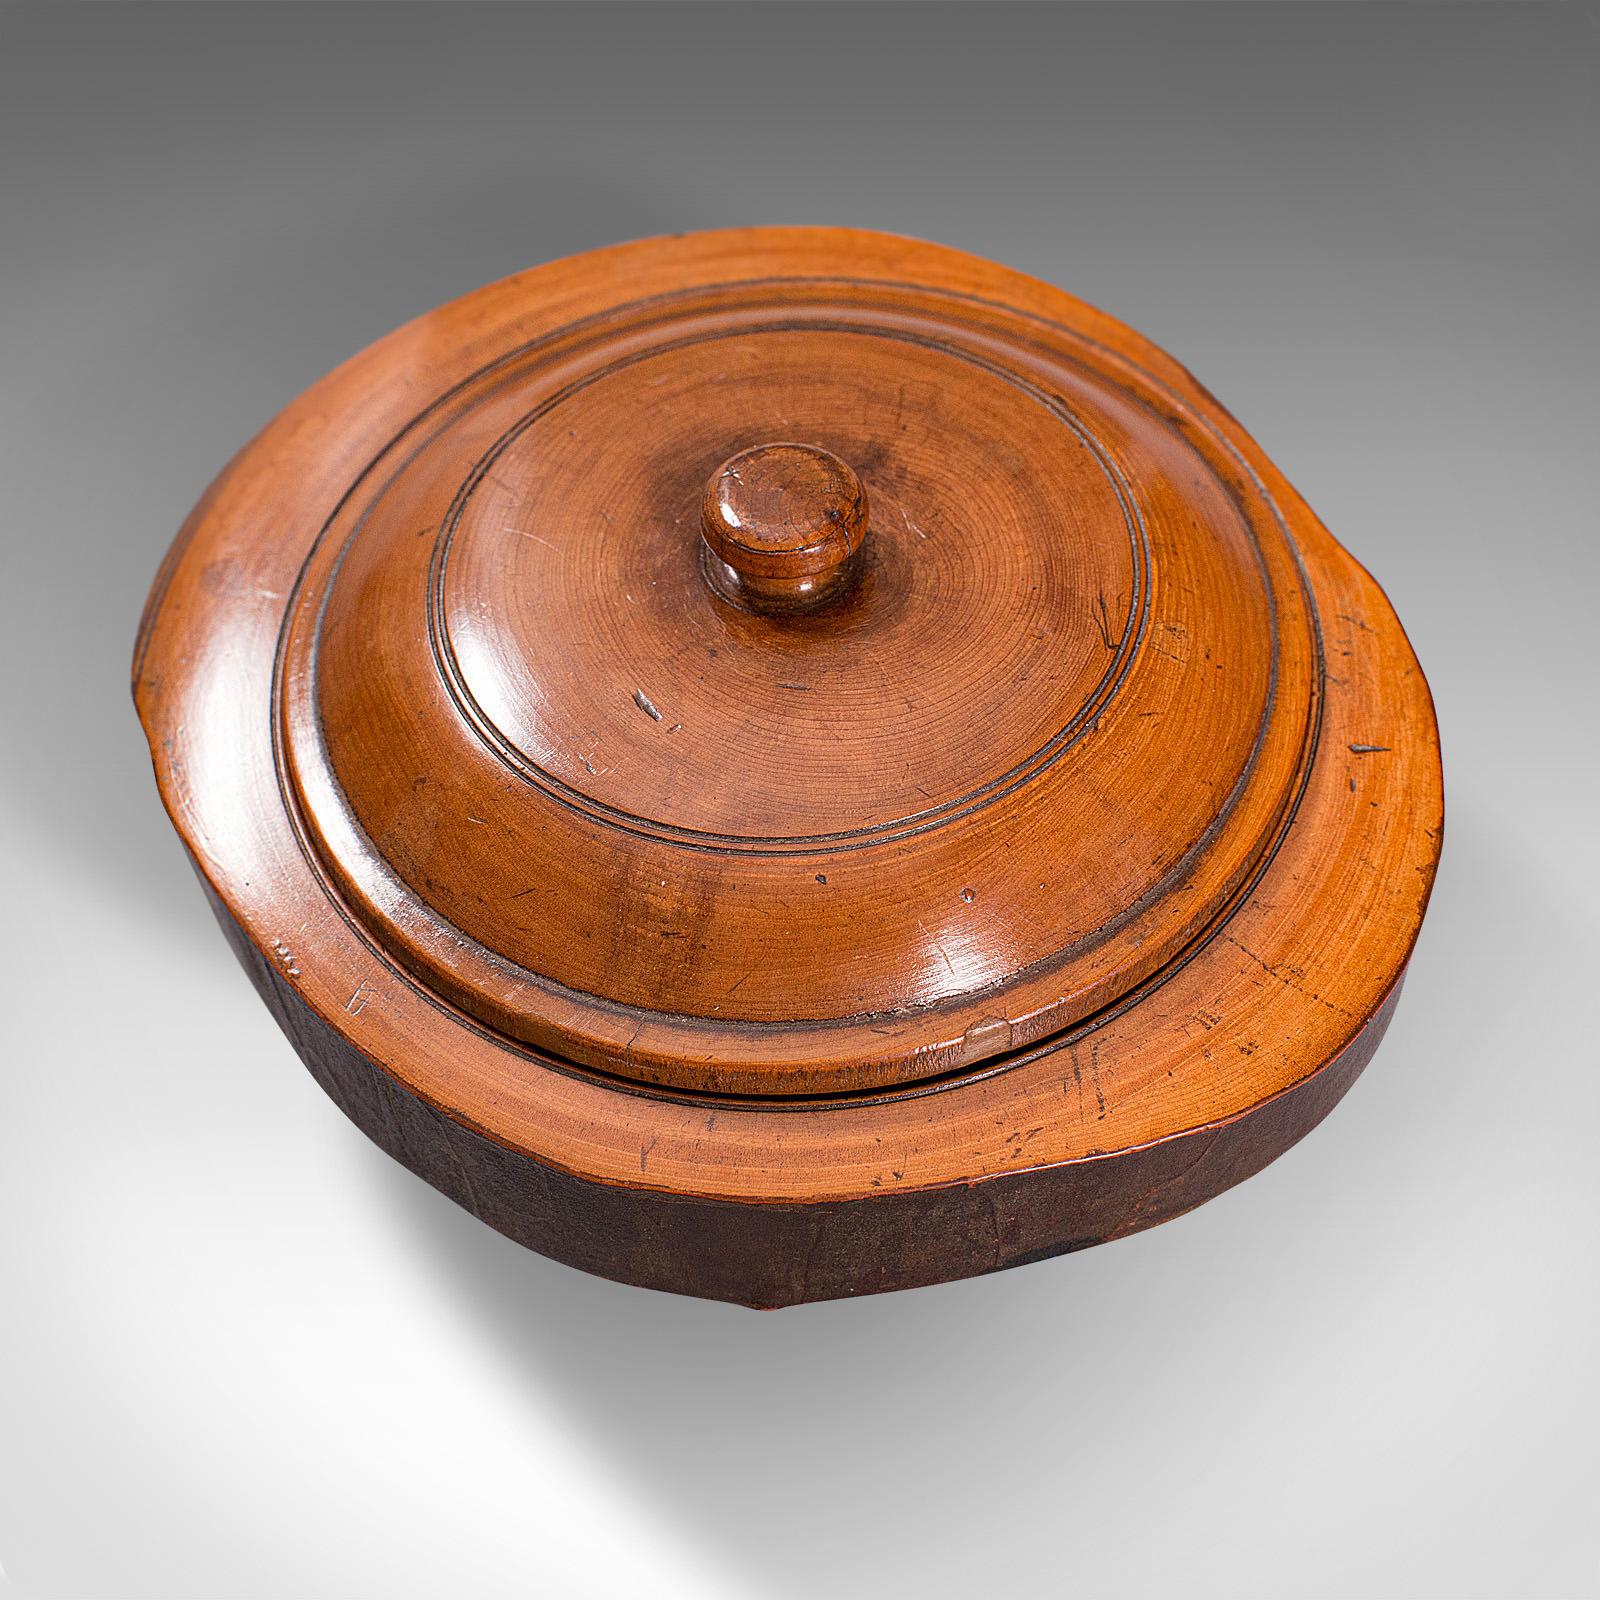 Pair of Antique Carved Lidded Bowls, Treen, English, Yew, Victorian, circa 1900 For Sale 2